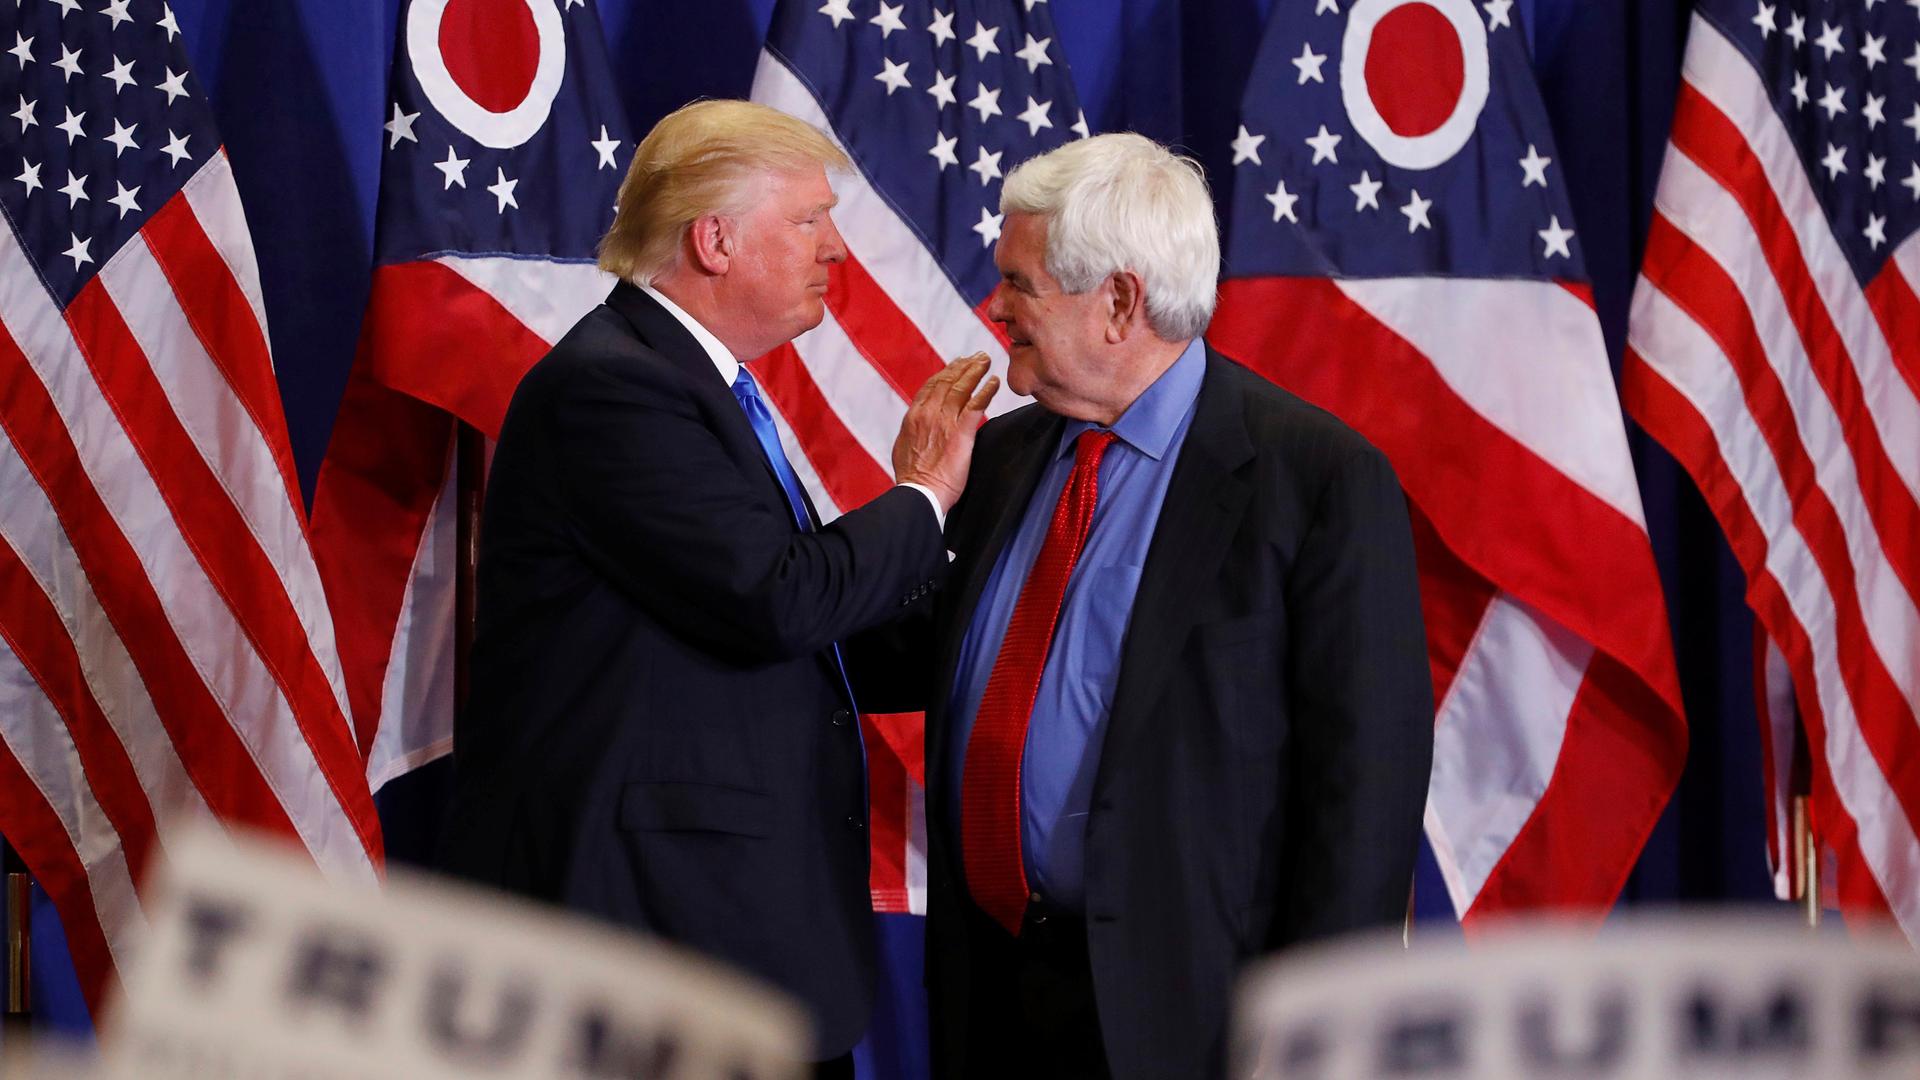 Former Speaker of the House Newt Gingrich greets U.S. Republican presidential candidate Donald Trump at a rally at in Cincinnati, Ohio on July 6, 2016.